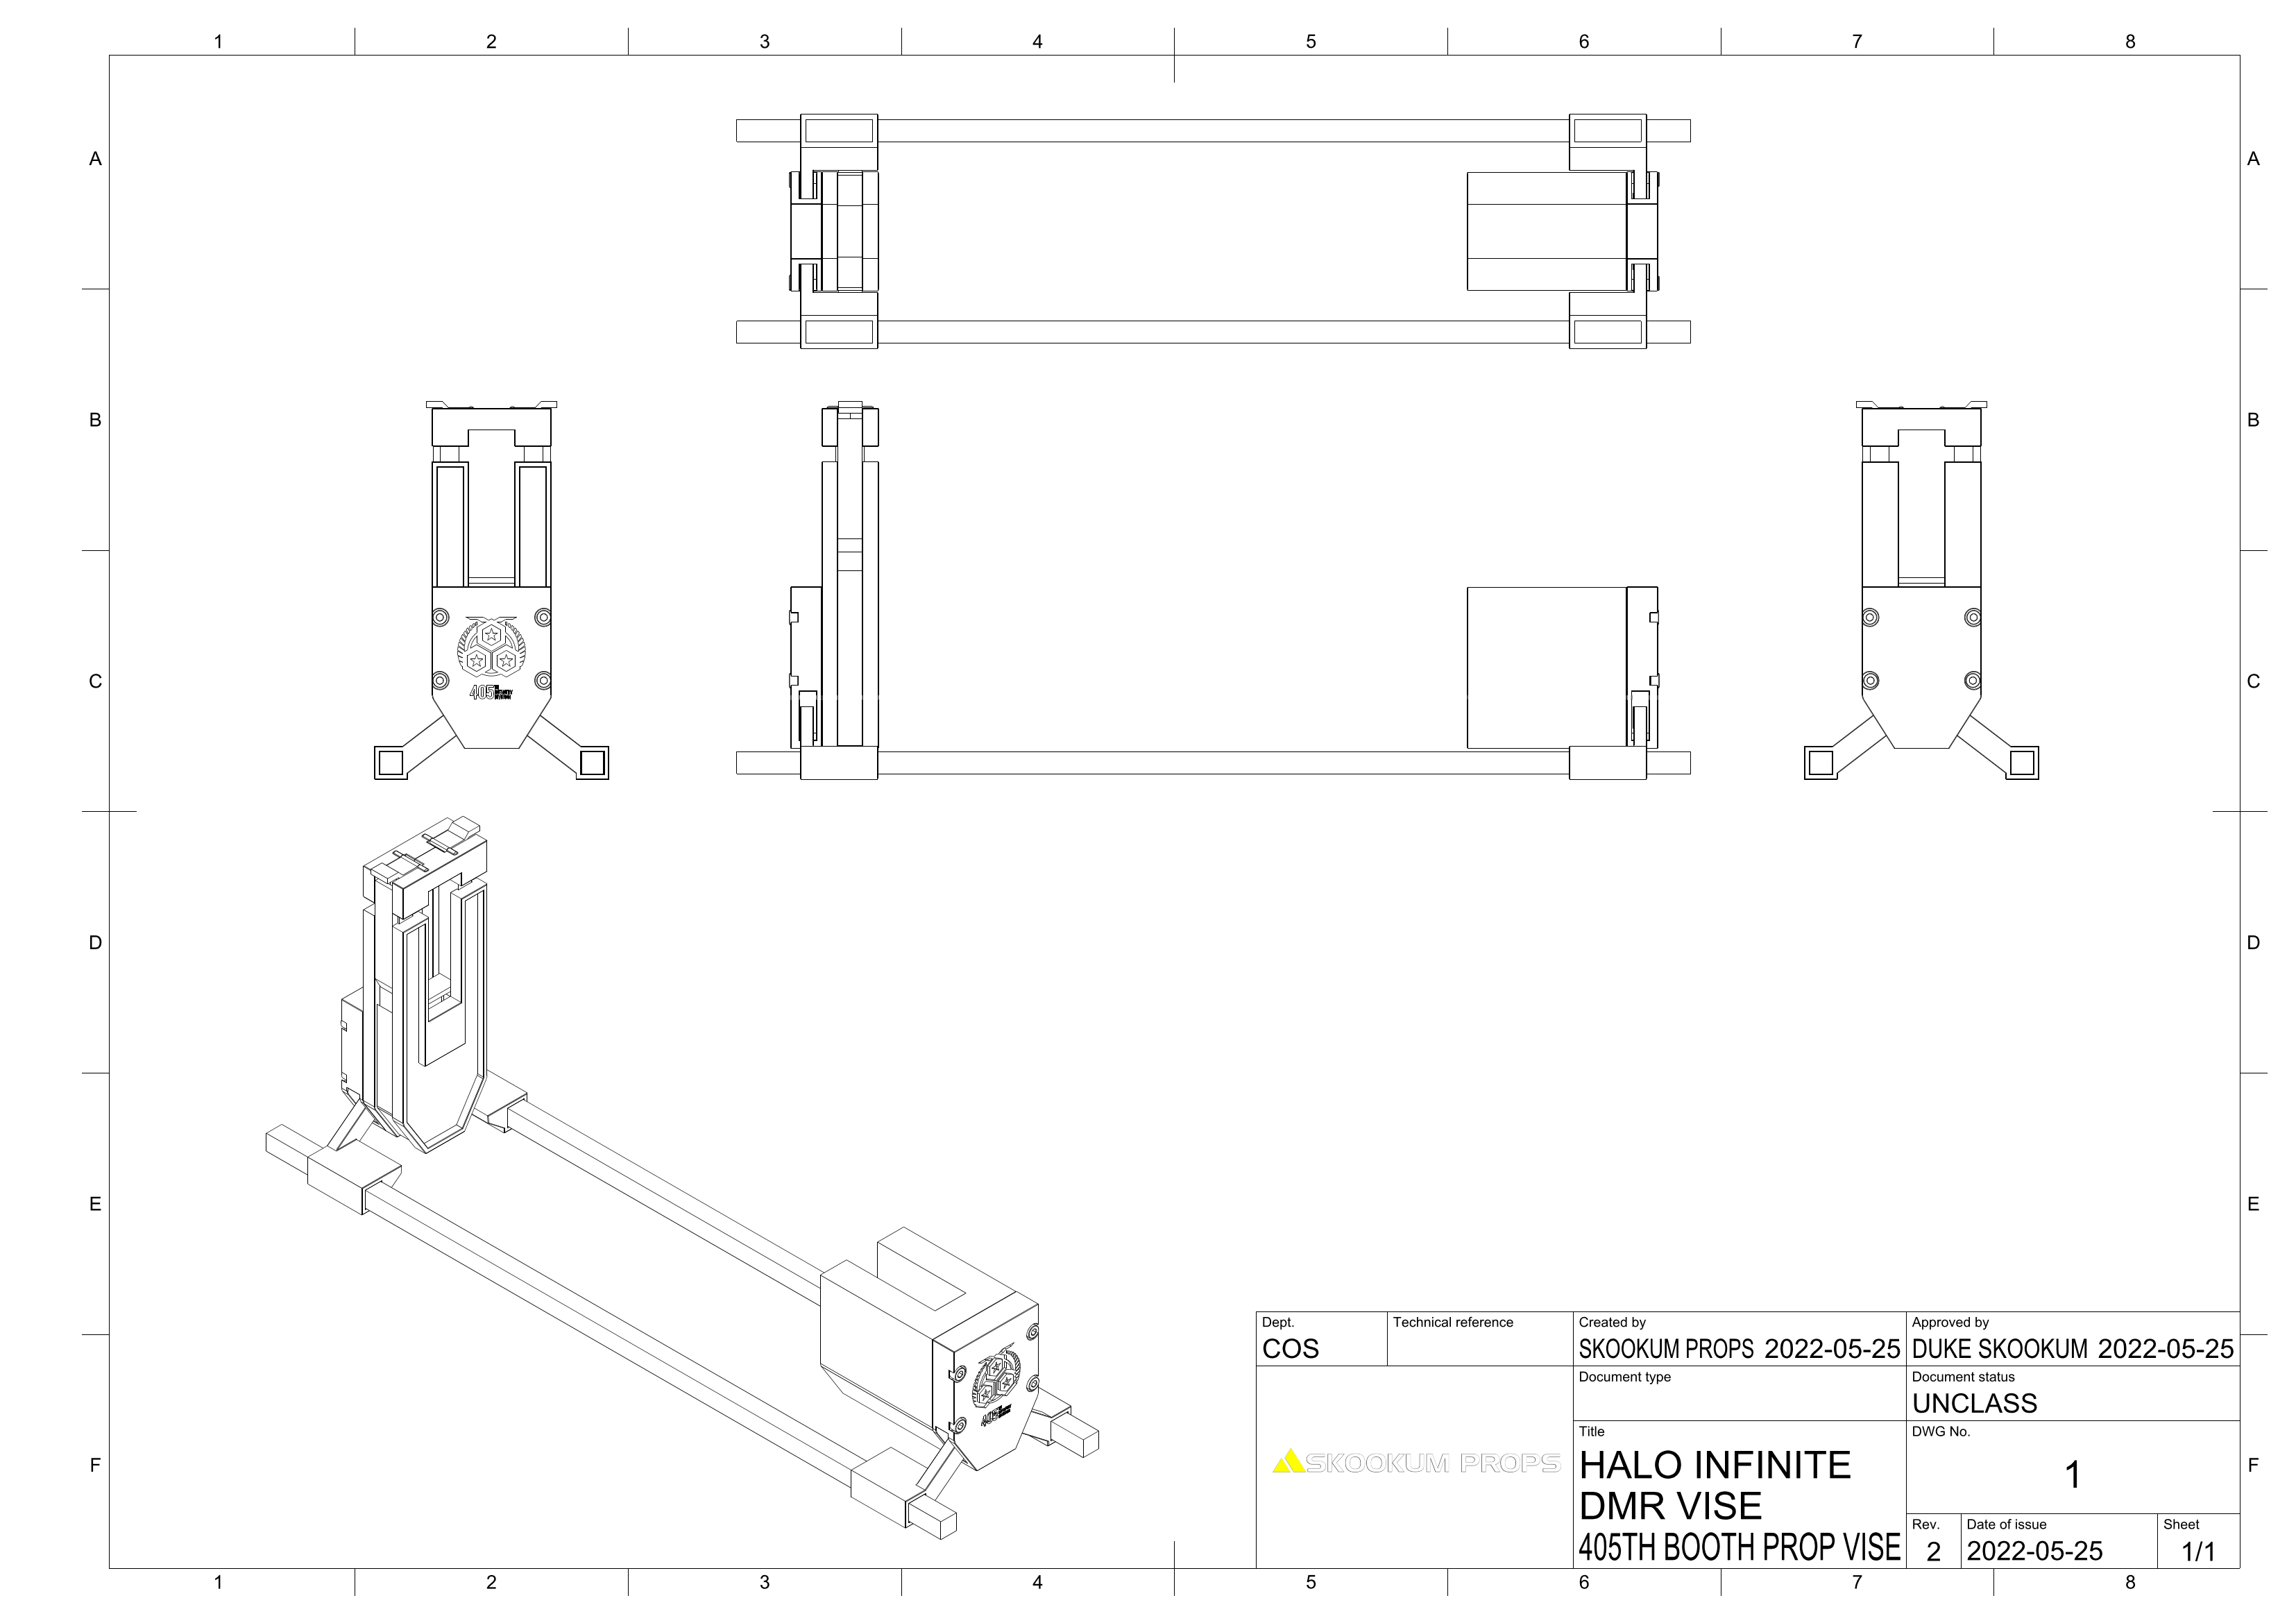 Prop Vise Drawing v1_Page_1.png